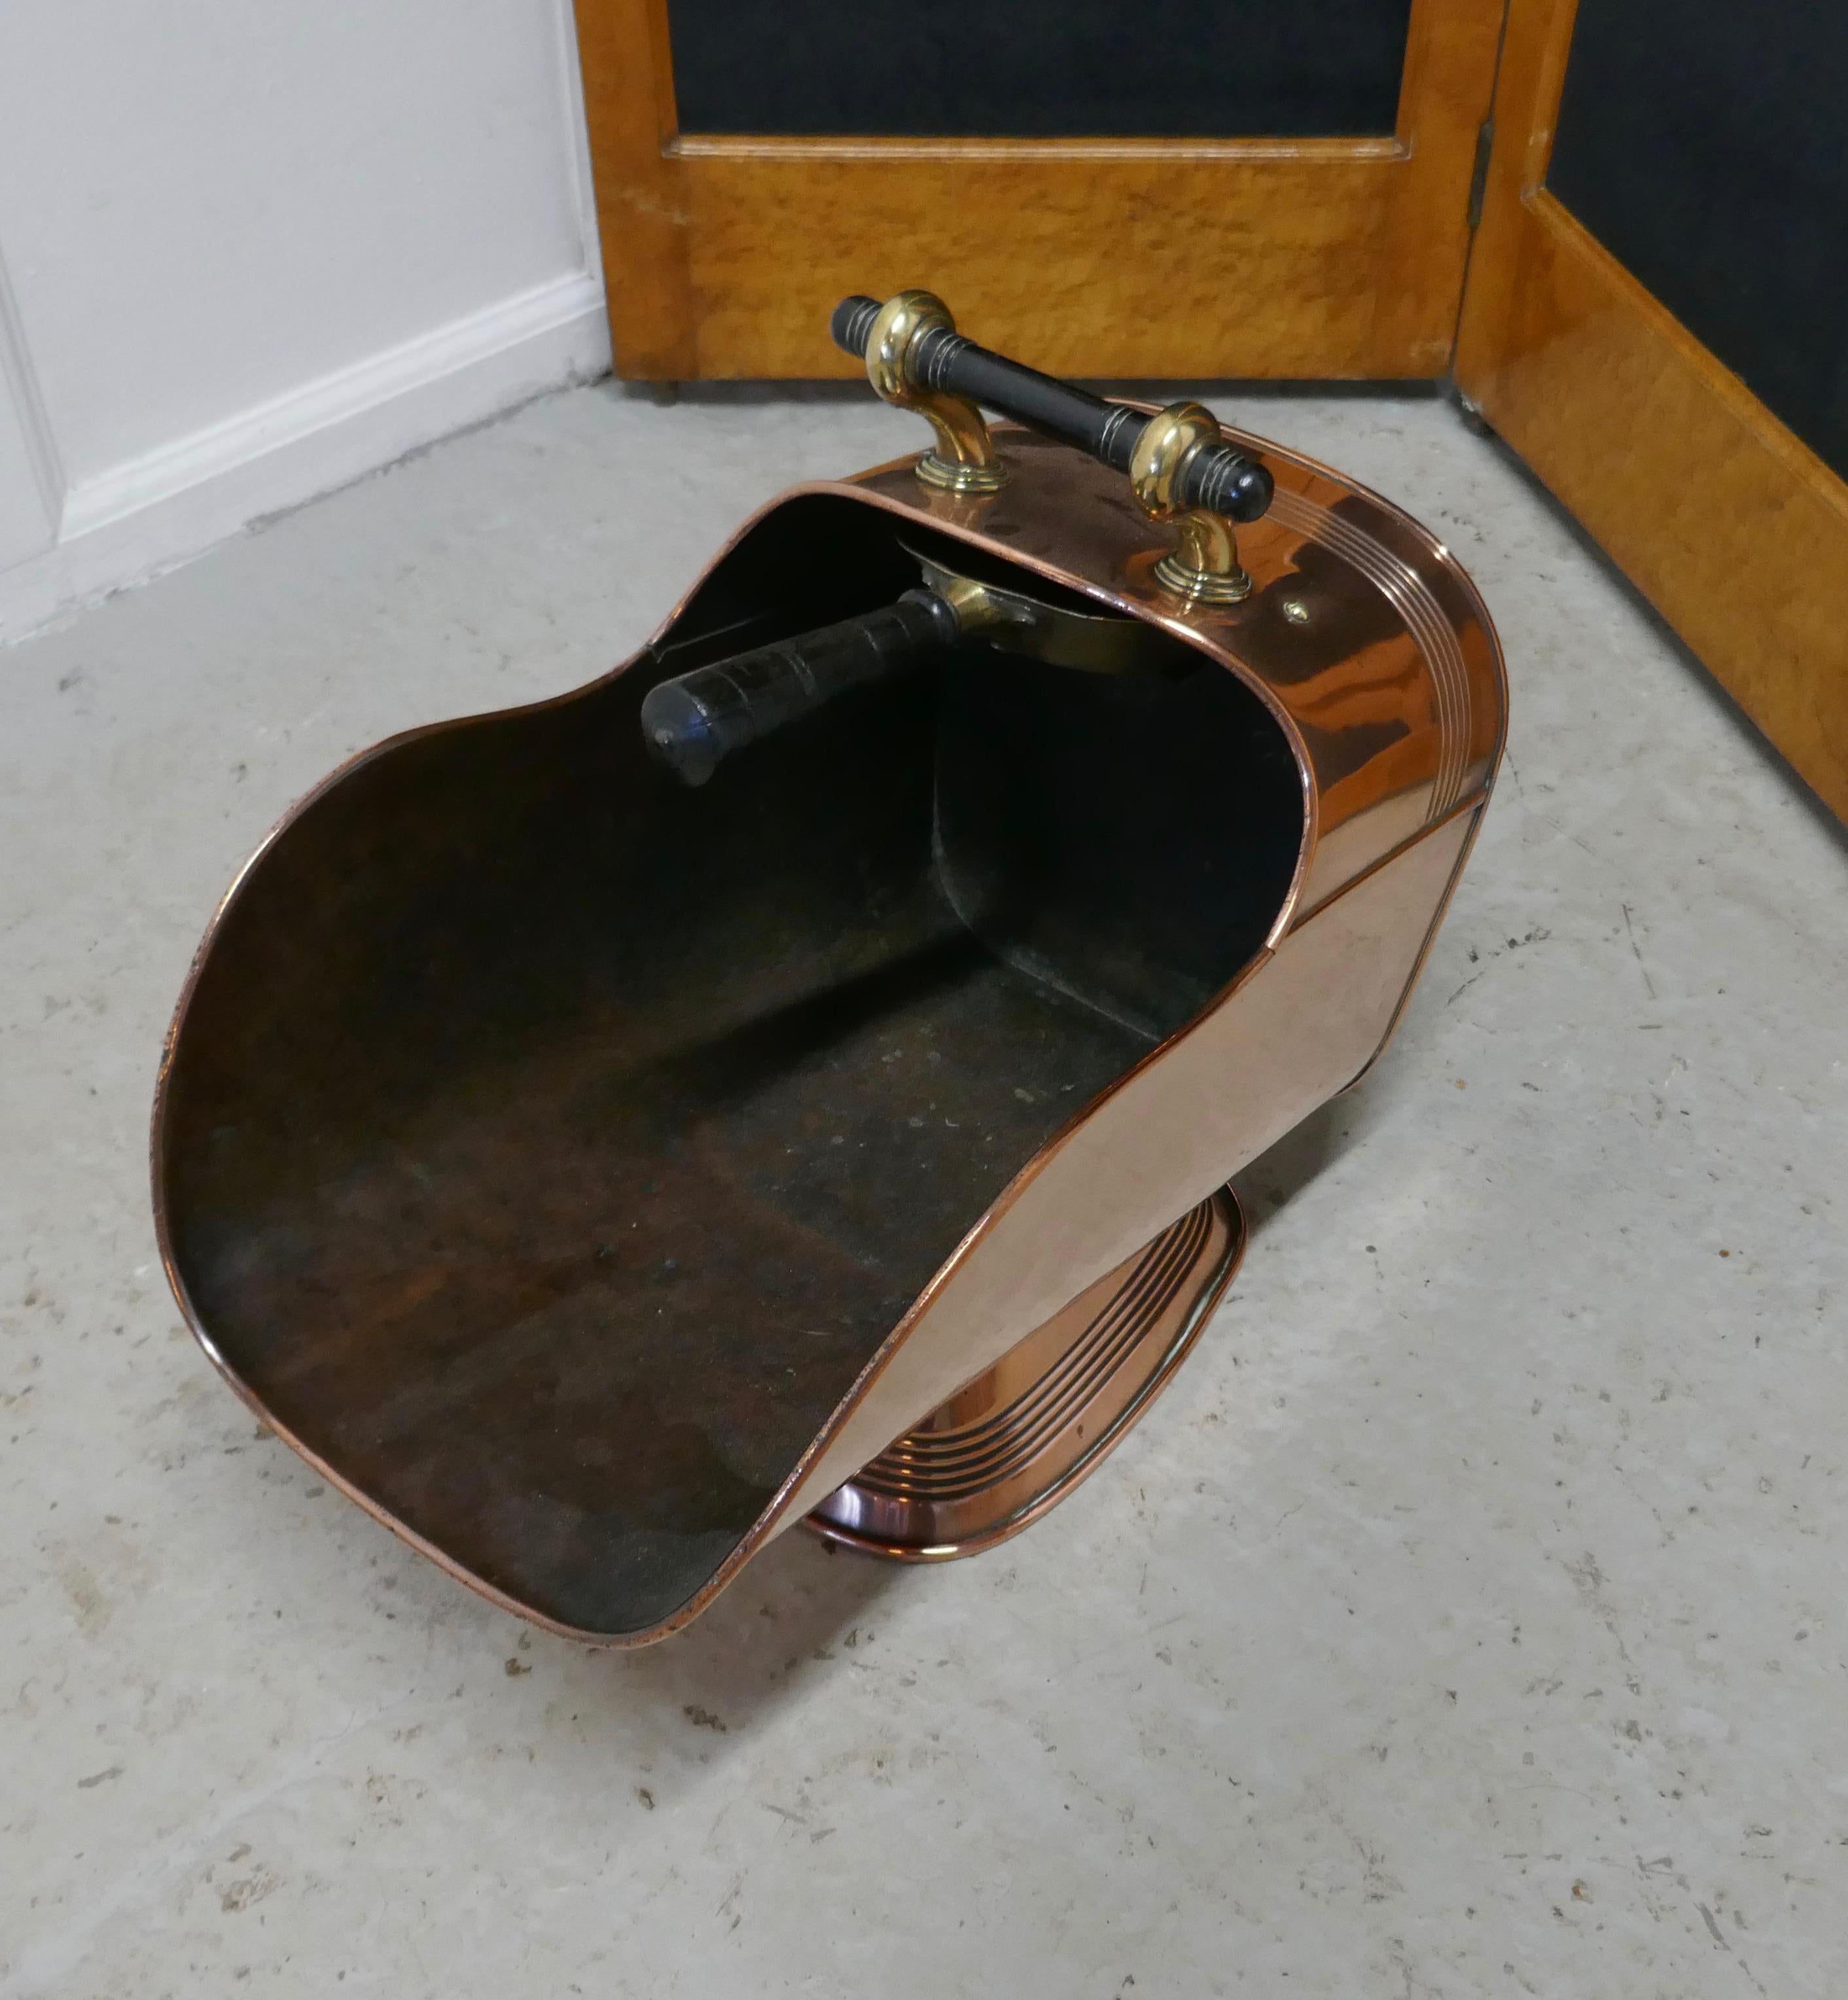 Superb large Arts & Crafts copper helmet coal scuttle

This very top quality piece has good shape, and a broad base foot, it comes with its own brass shovel which is kept inside 

The scuttle is in good condition polished and ready to use, it